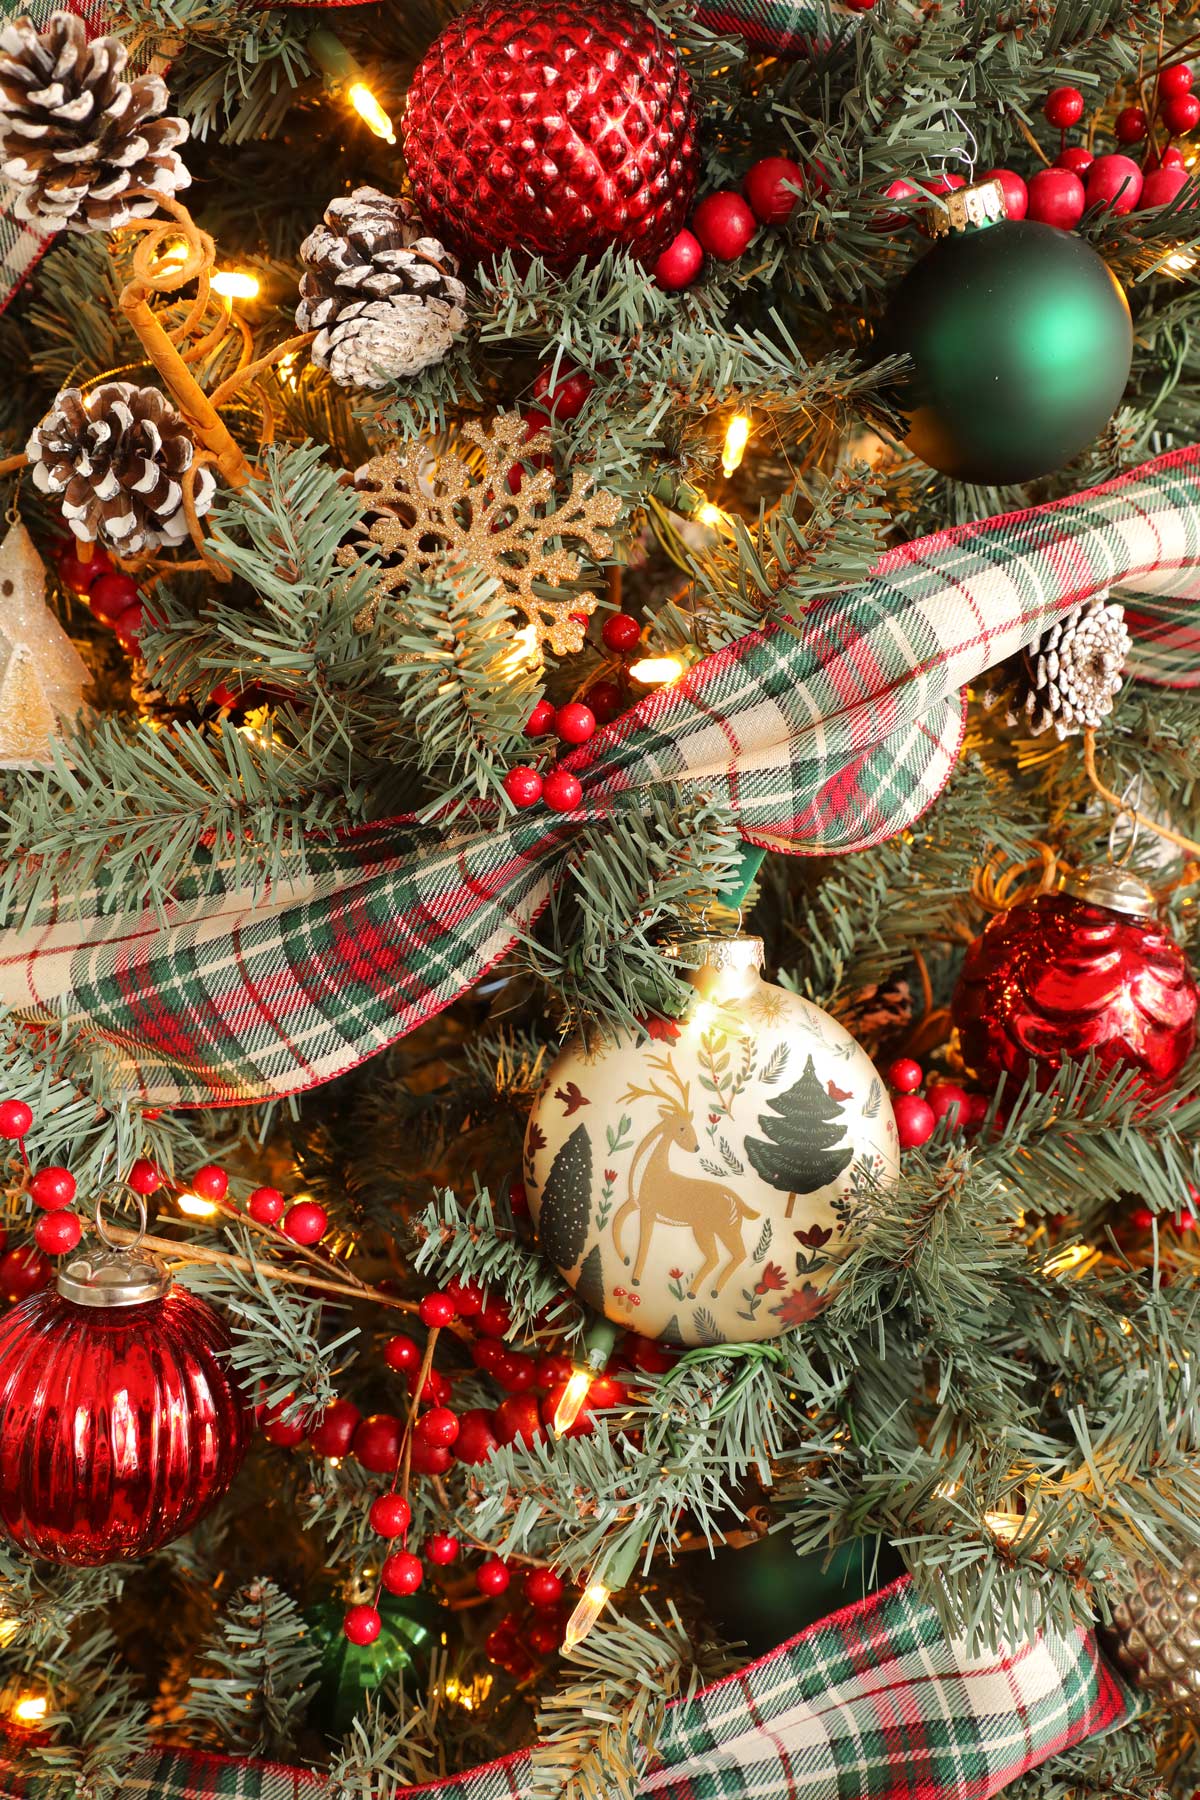 A close up of a Christmas tree with plaid ribbon and intricate ornaments.